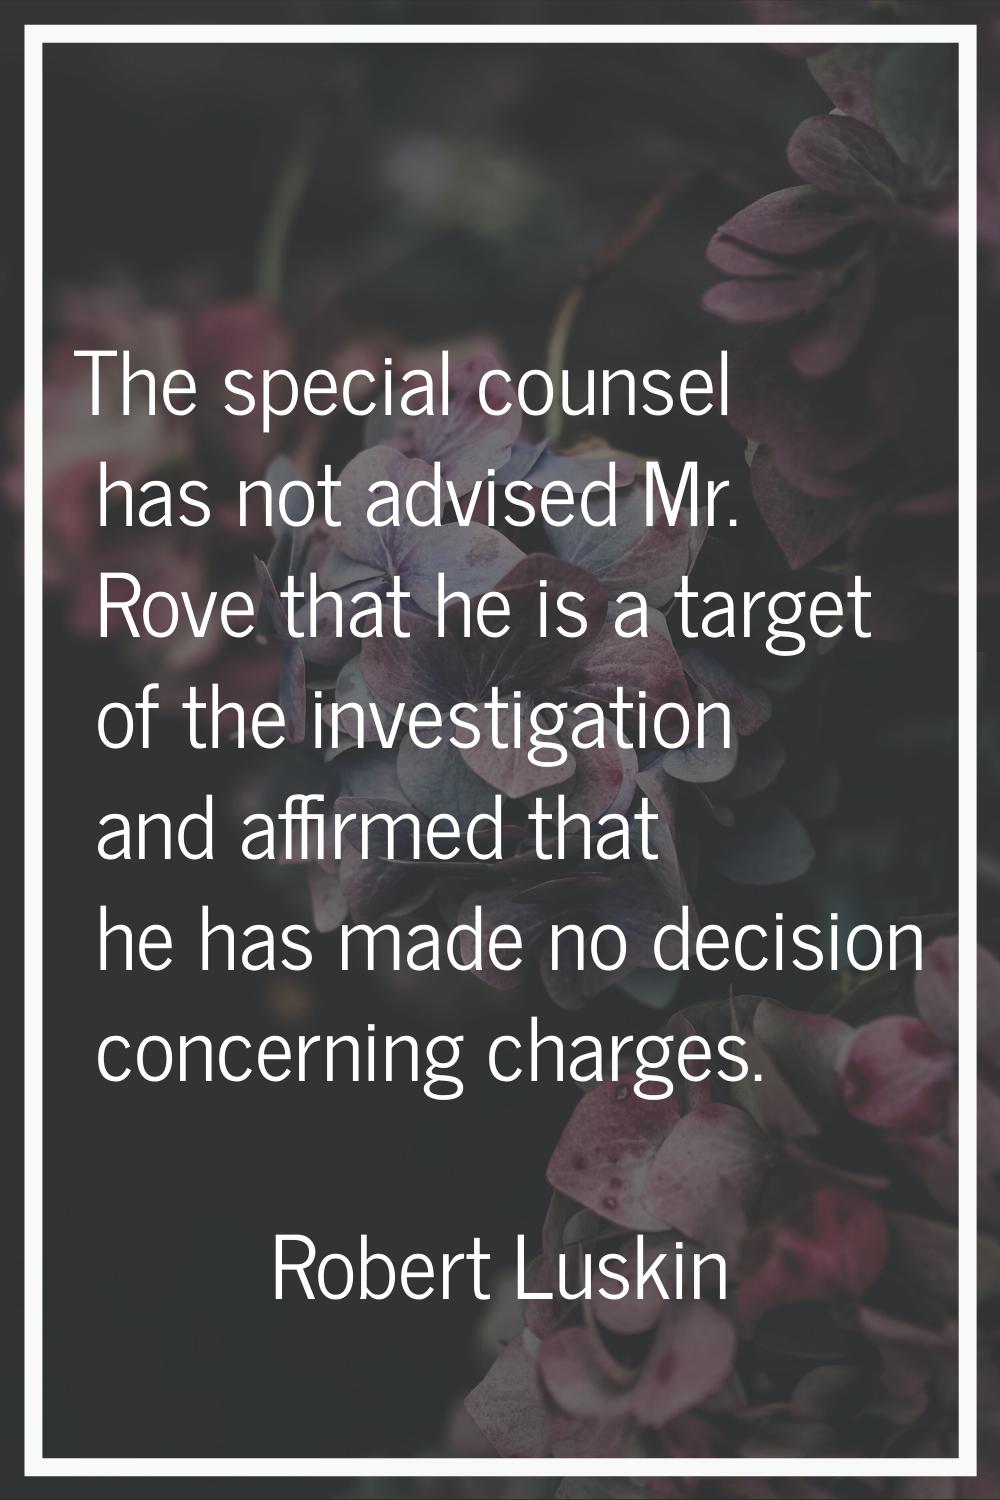 The special counsel has not advised Mr. Rove that he is a target of the investigation and affirmed 